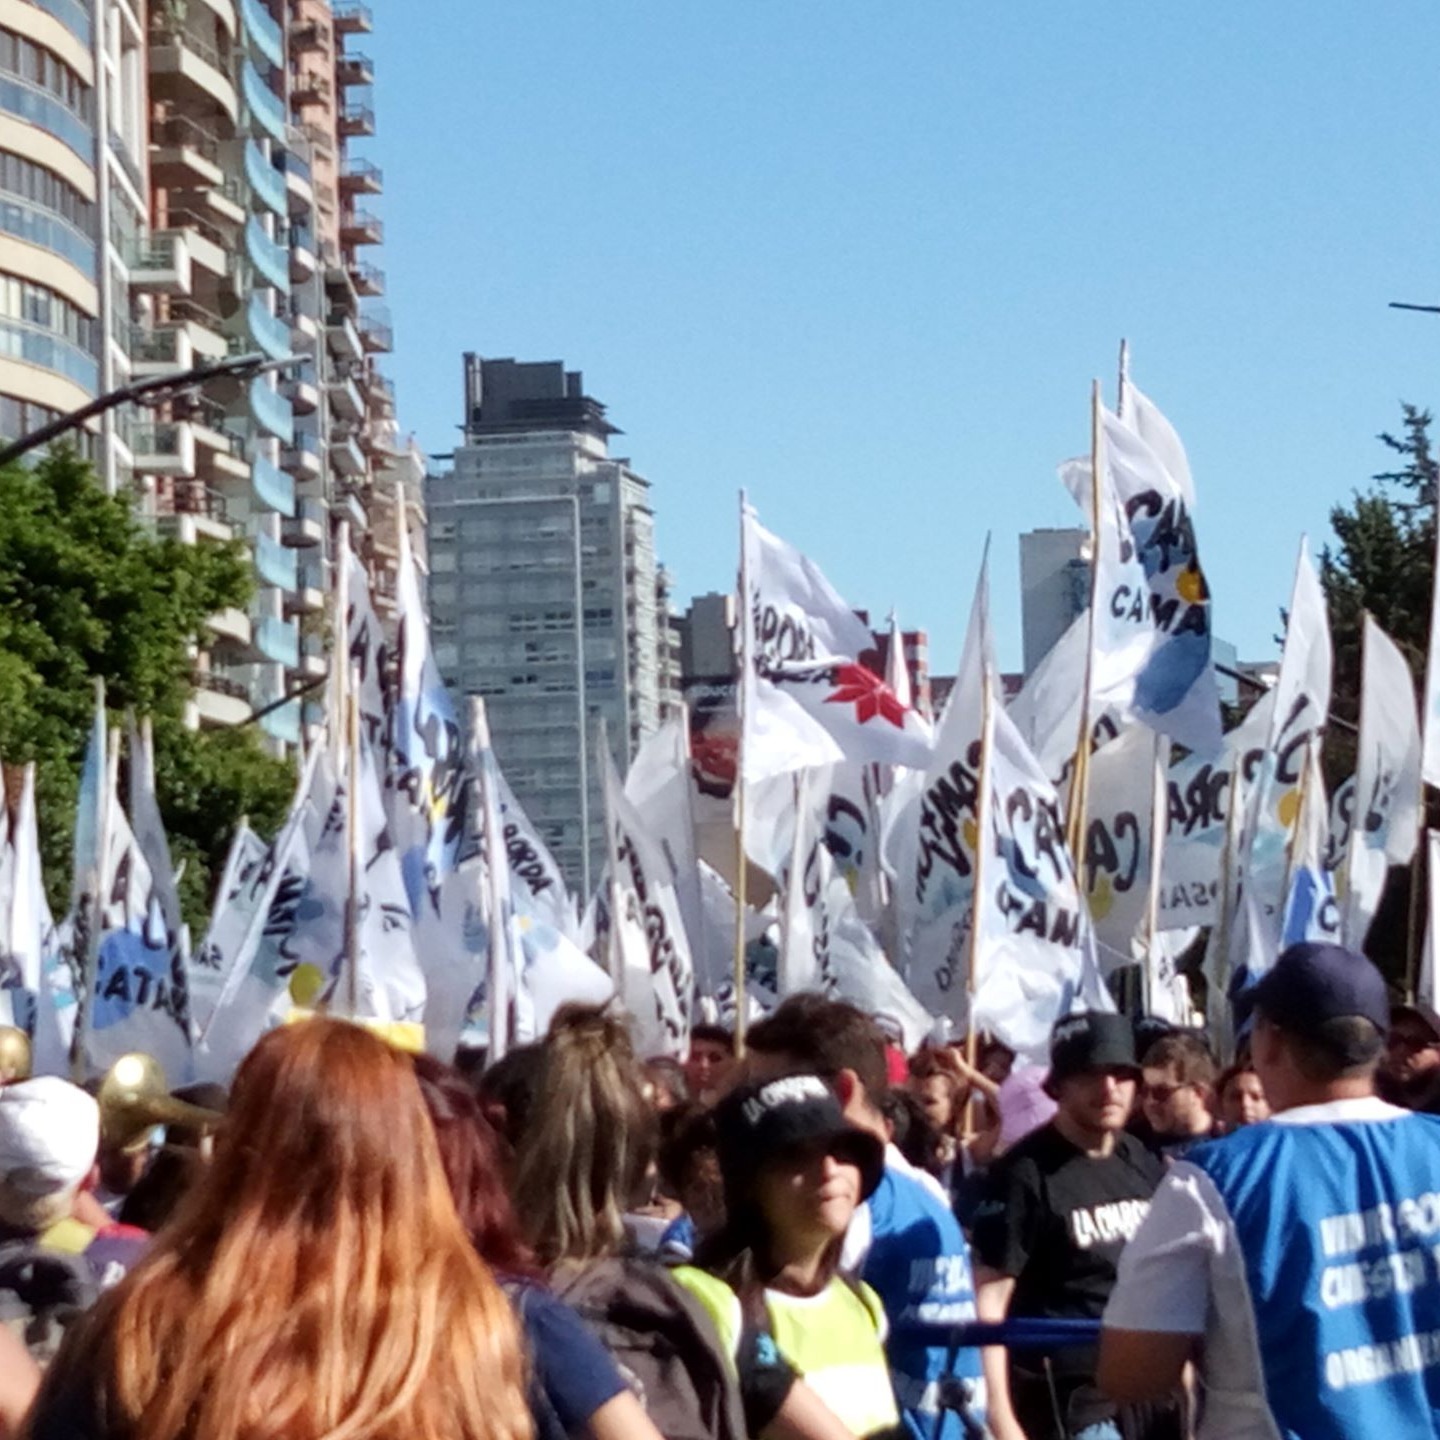 Argentina Celebrates 40 Years of Democracy and Human Rights